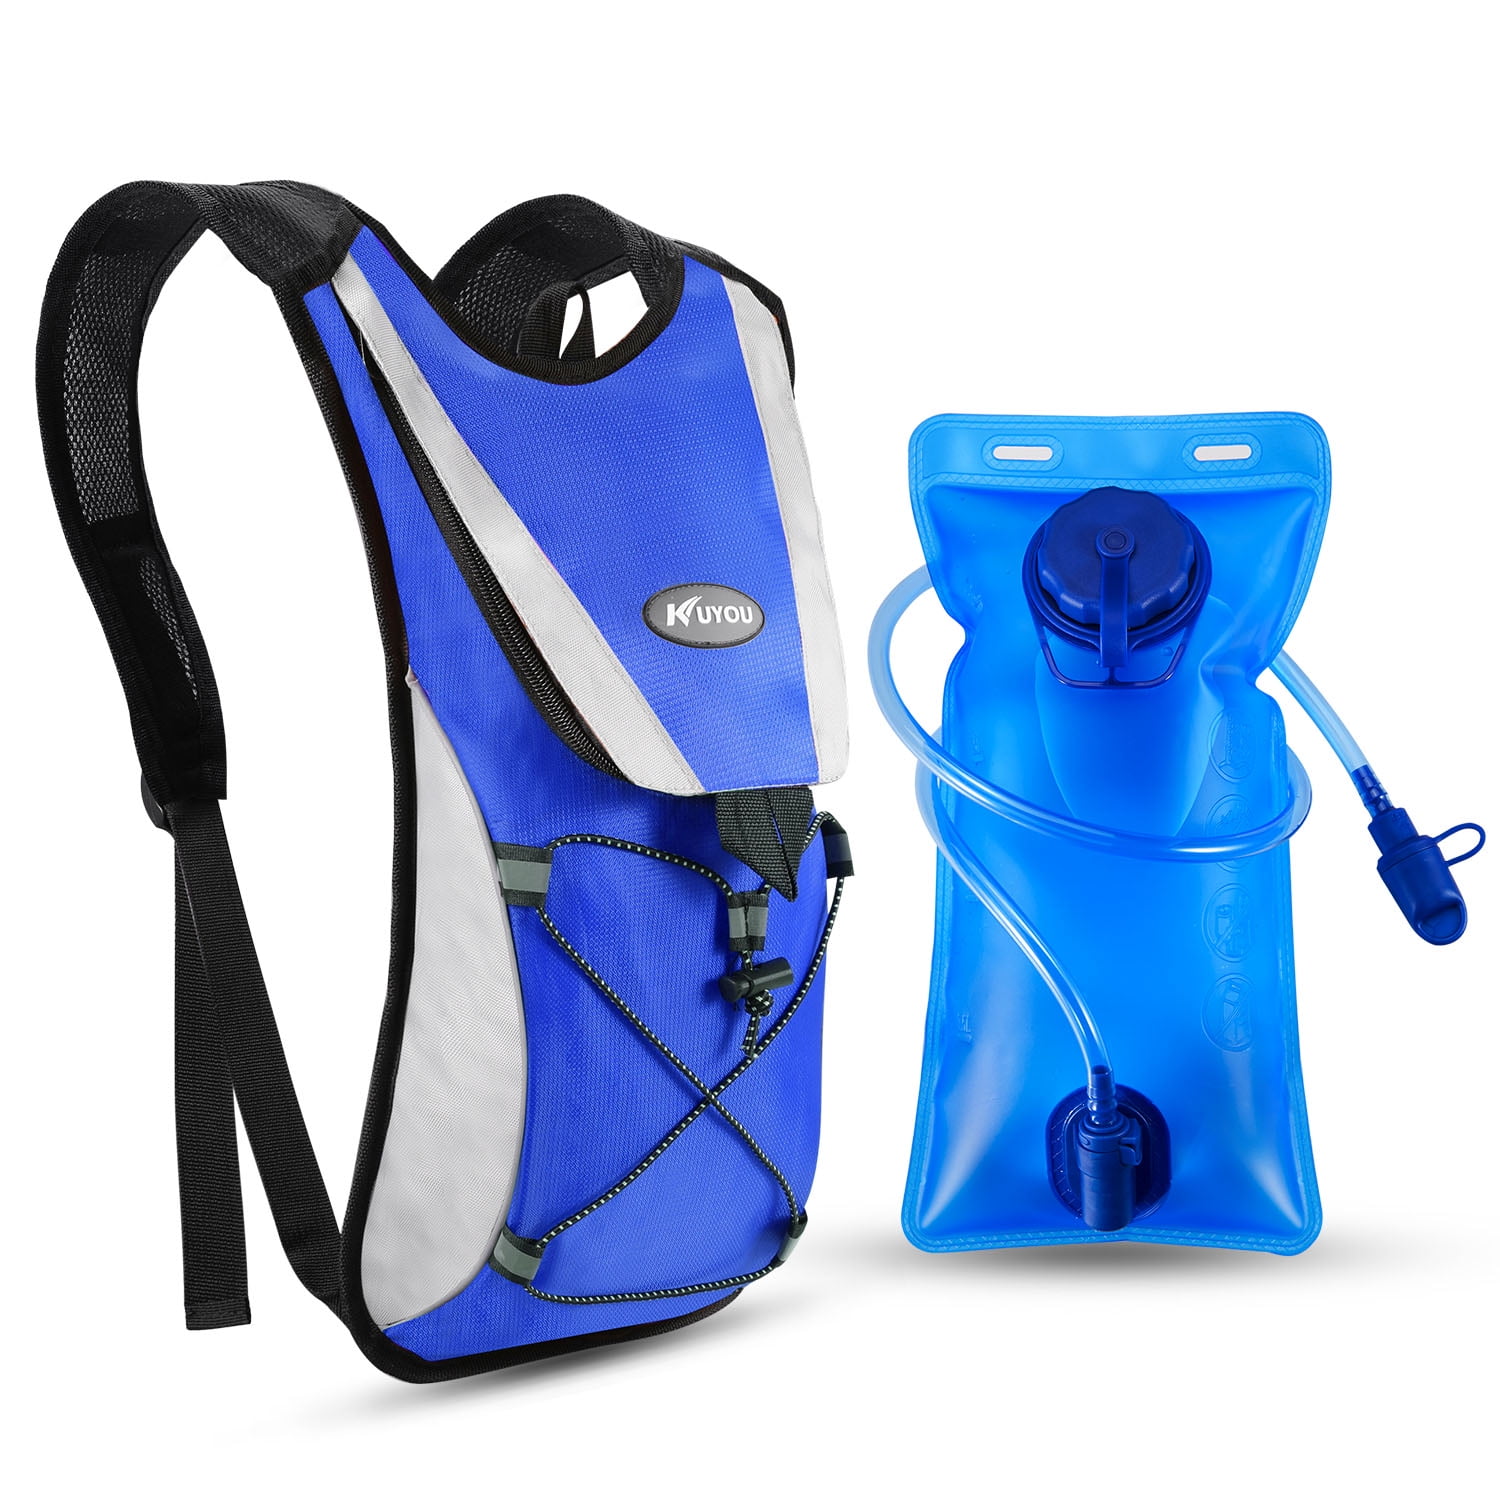 Portable Bike Mouth Hydration Water Bladder Bag Backpack For Hiking Camping etc. 